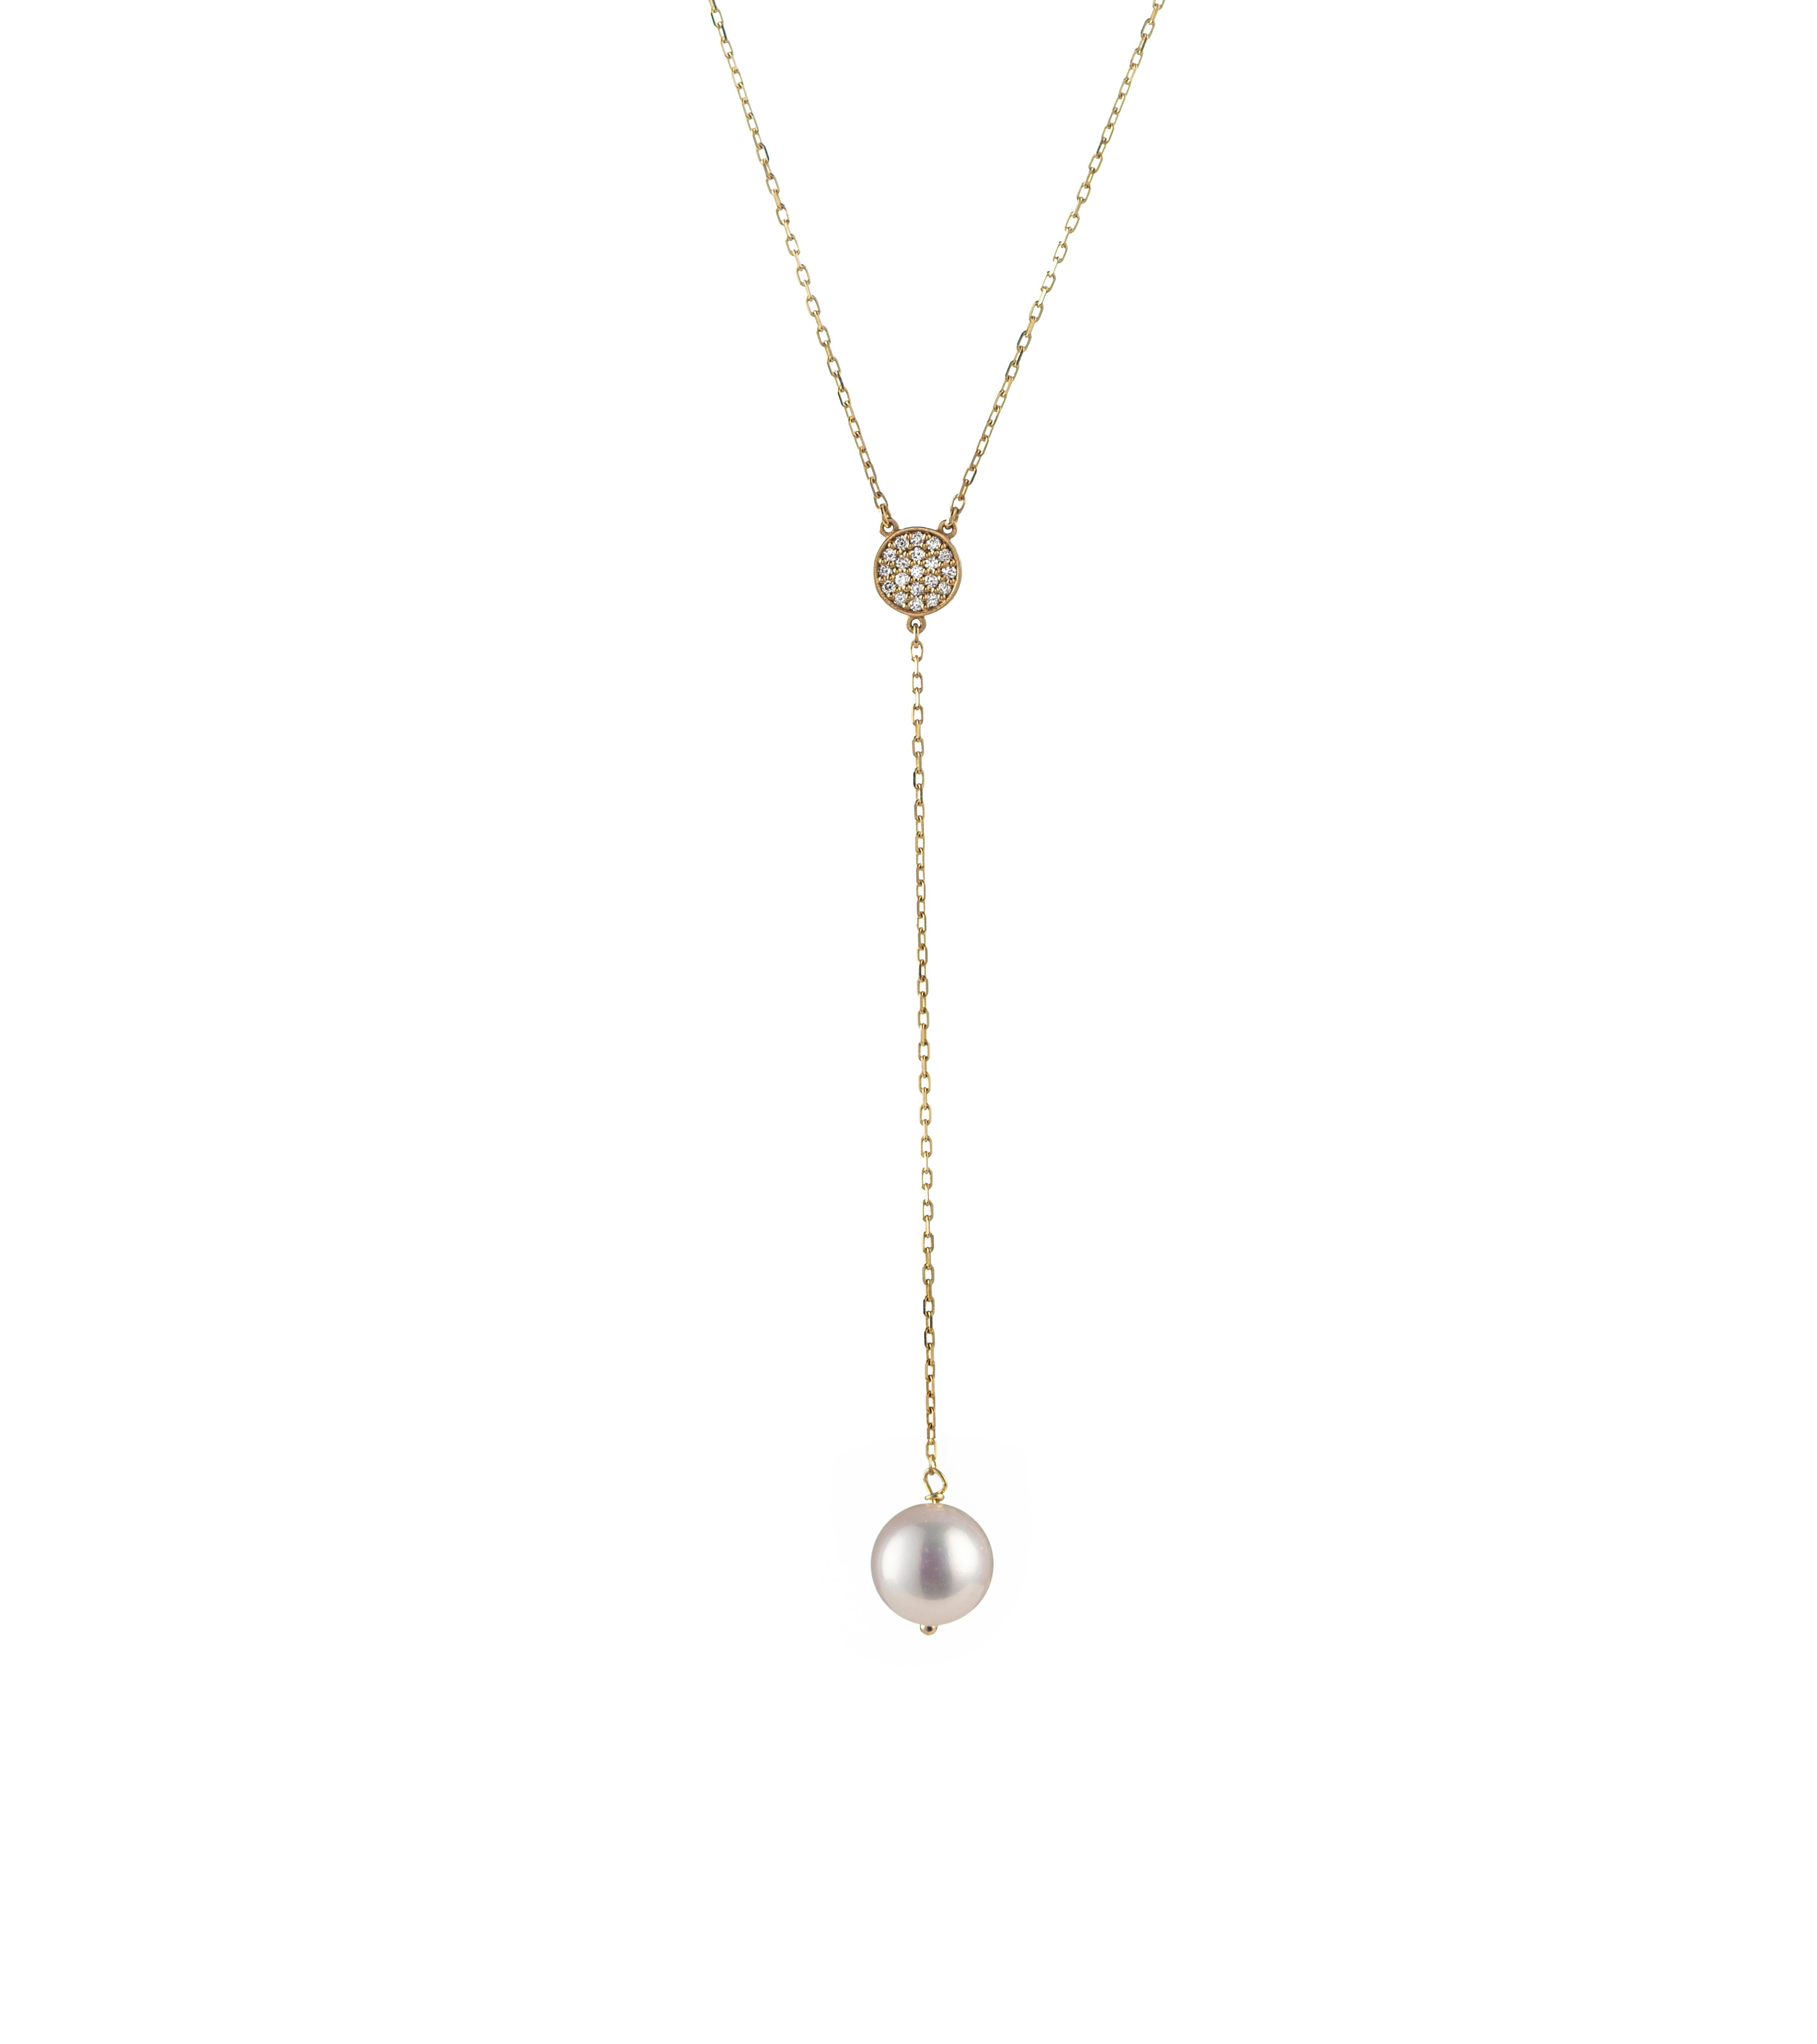 Our lariat necklace features a round freshwater pearl suspended from a sparkly chain and accentuated by a yellow gold disk set with glimmering diamonds.

 The simplicity in its silhouette combined with the high-quality materials used, make this the